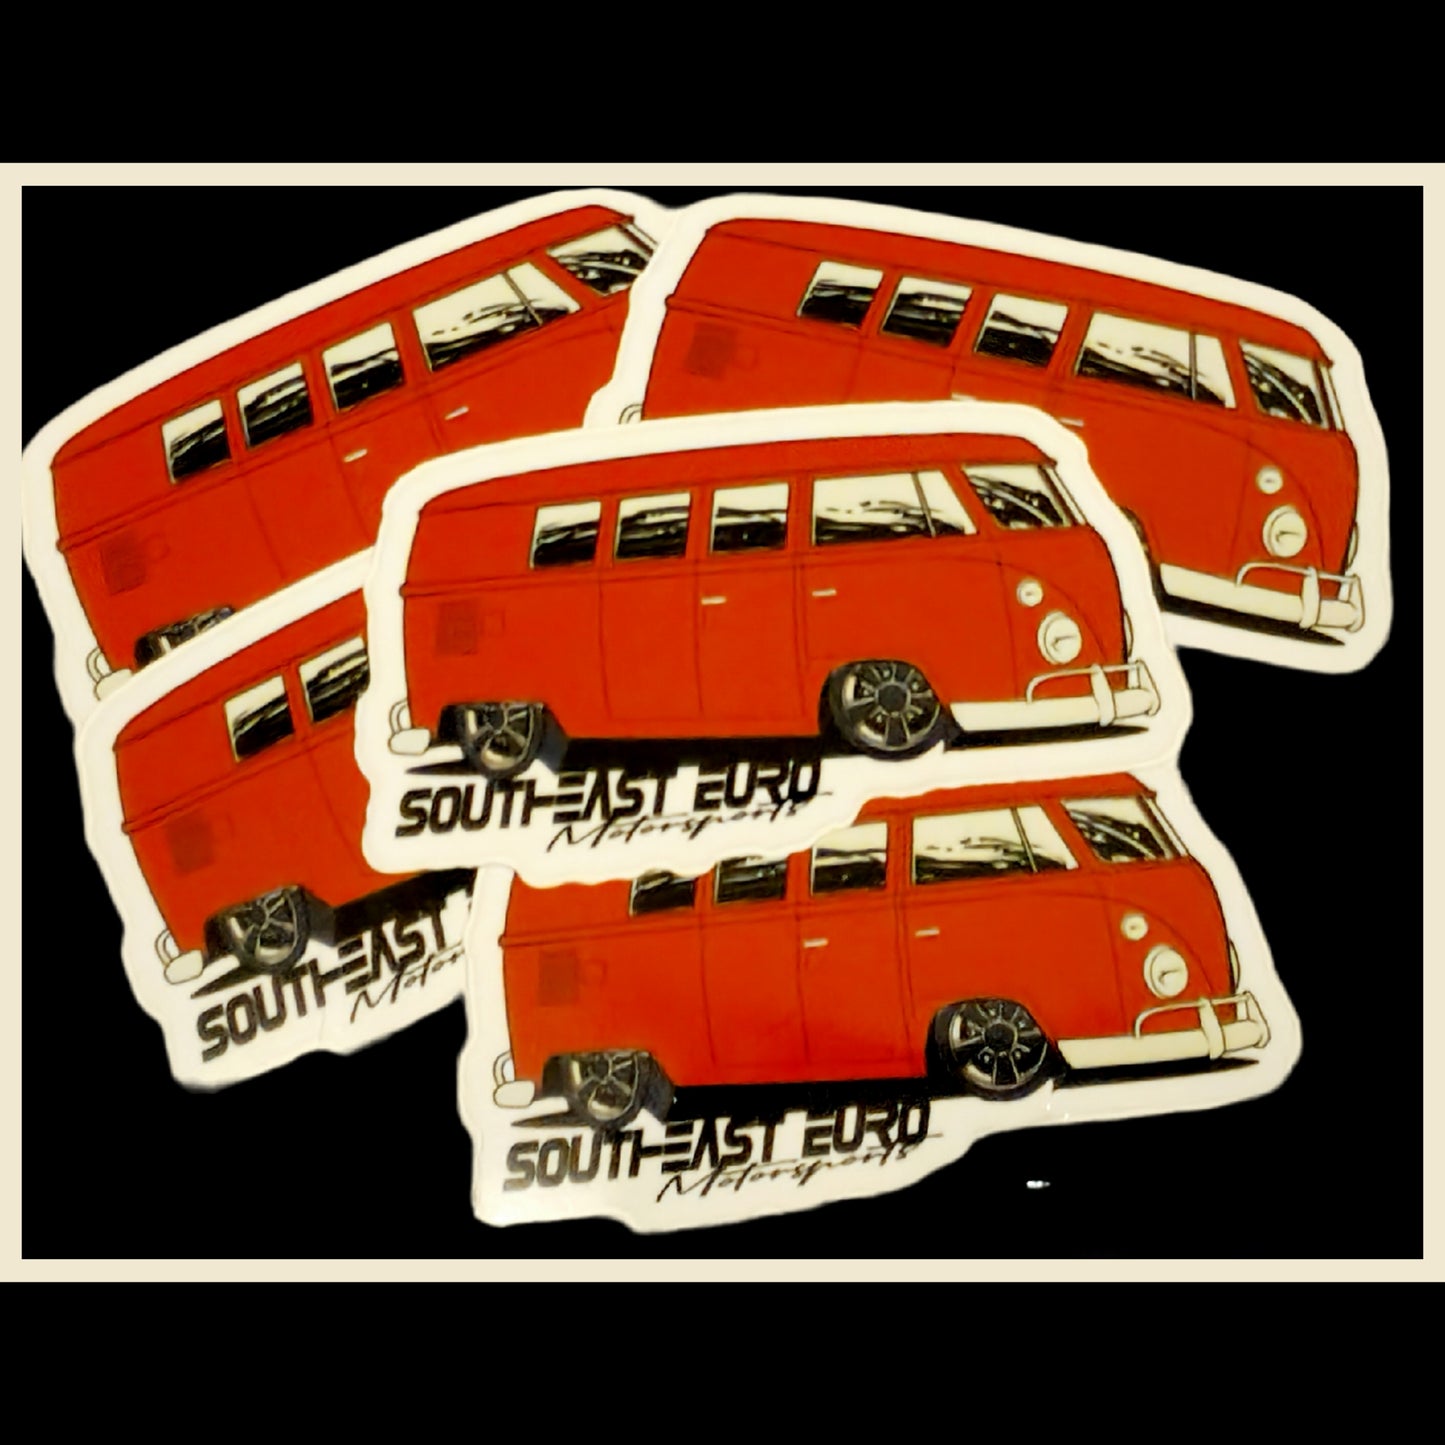 Bus Decal large